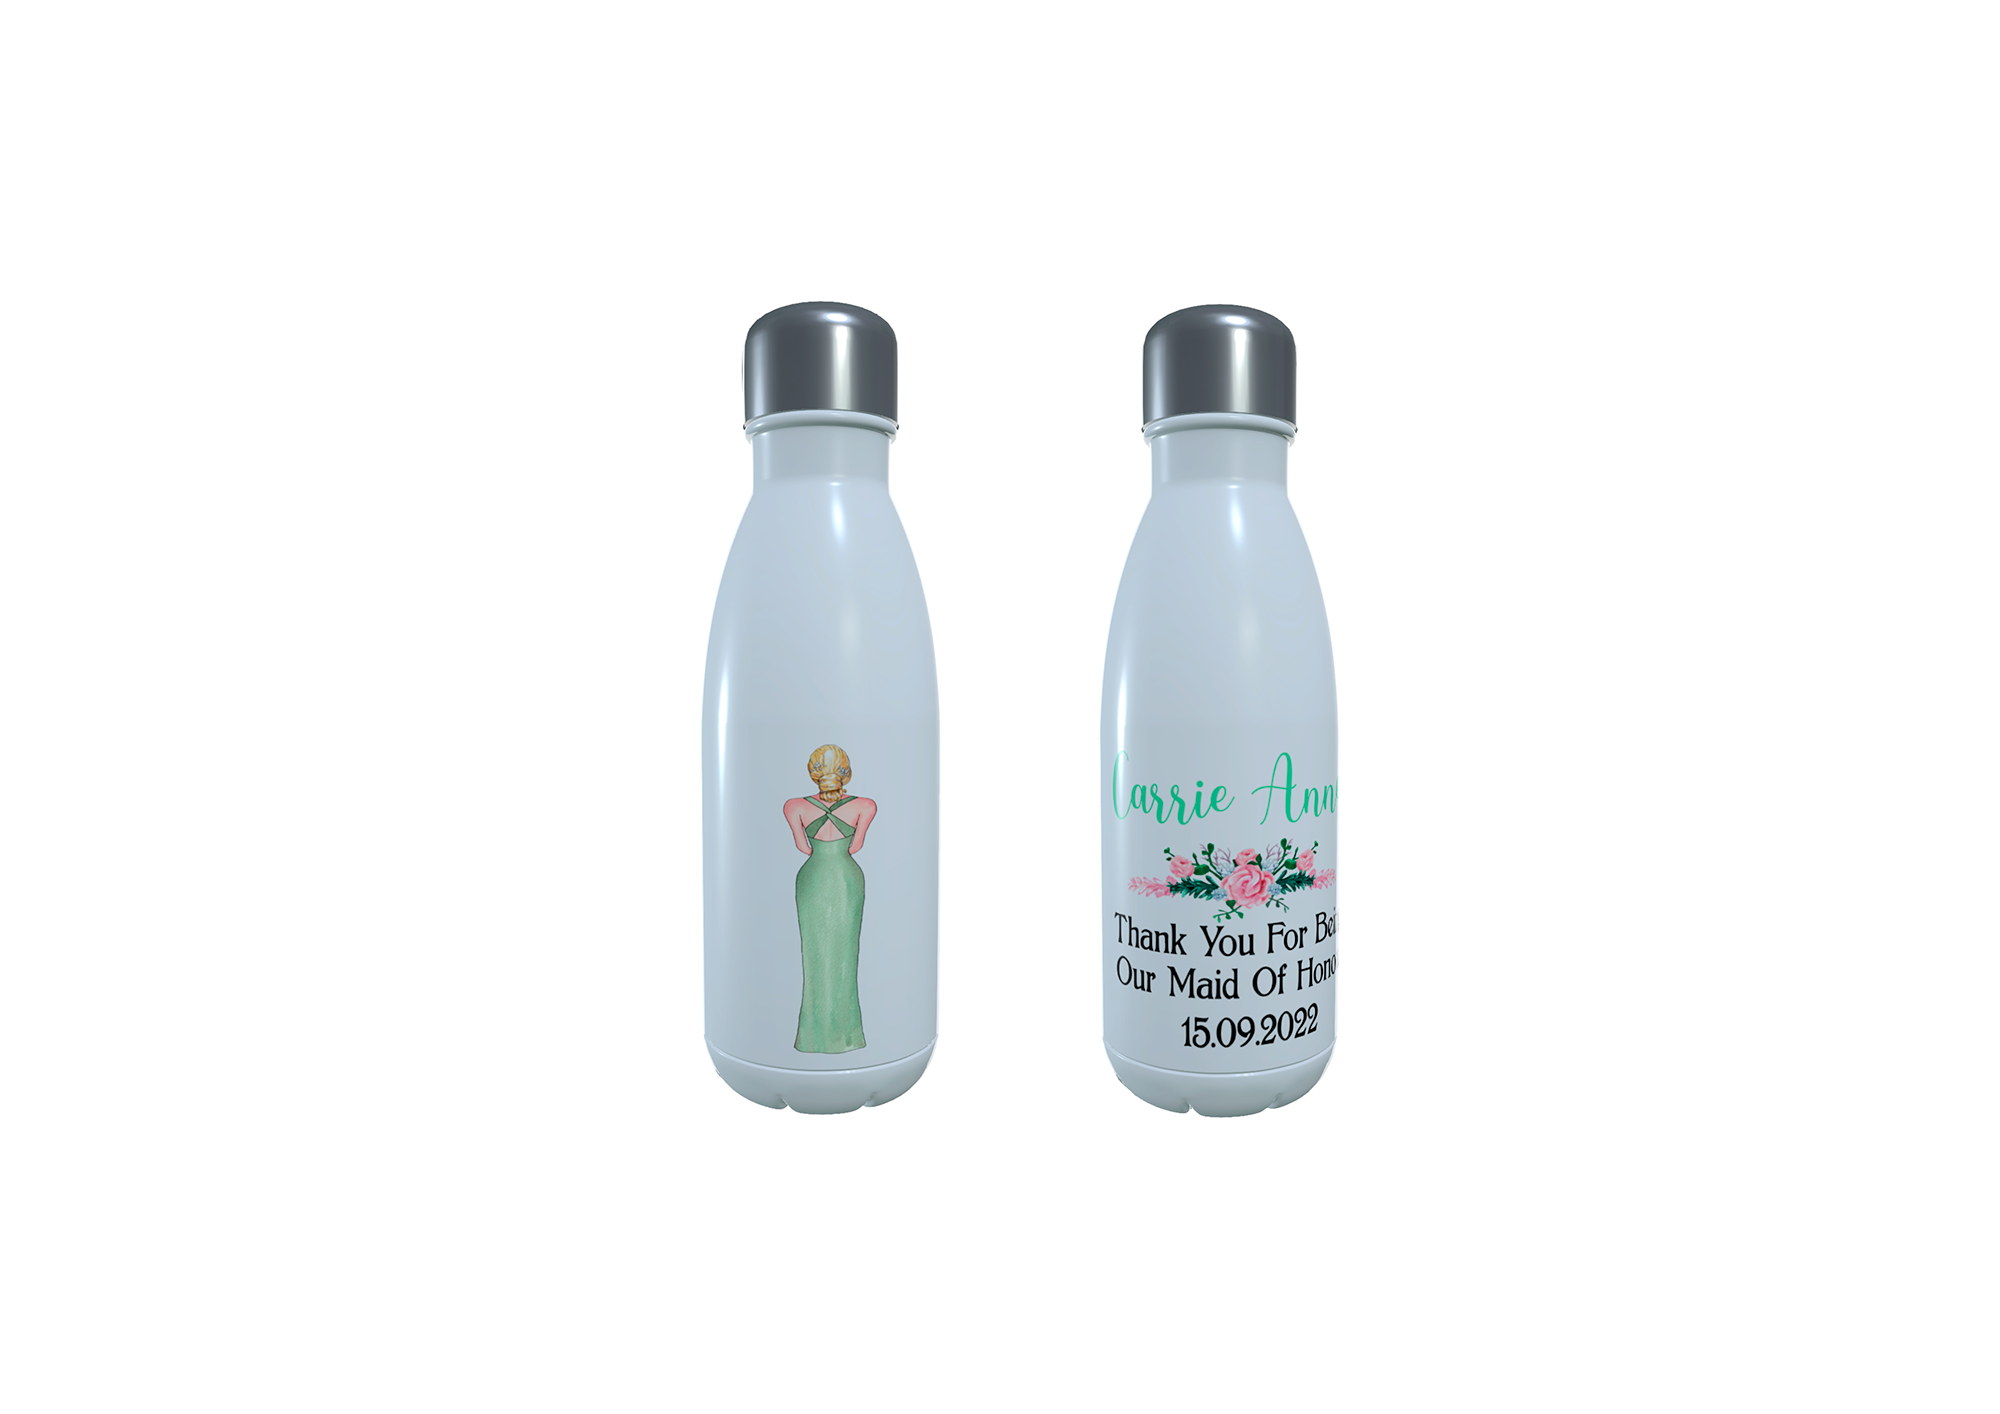 Maid Of Honor Personalised Water Bottle, Maid Of Honor Thermos